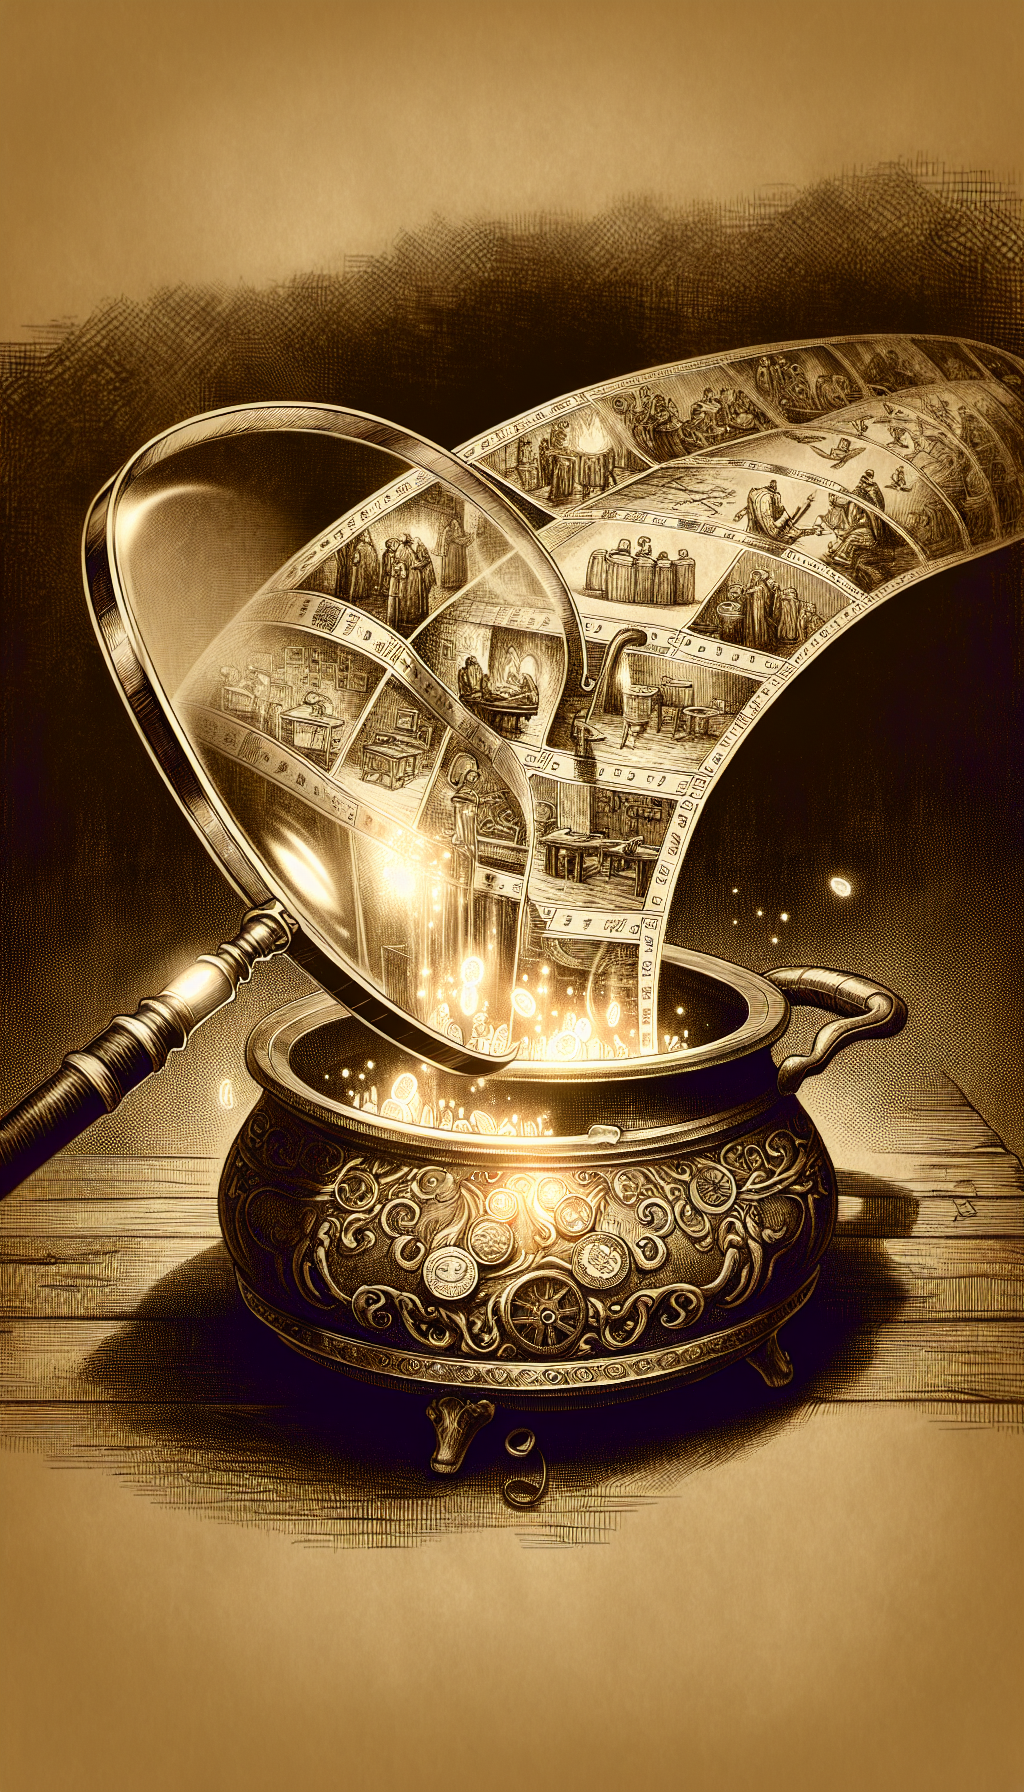 A sepia-toned illustration features a semi-transparent, ghostly timeline unfurling from within an ornate antique cast iron cauldron. Along the timeline are sketched pivotal historical events, blacksmiths crafting, and trade routes. At the end, a shimmering appraiser's magnifying glass hovers over the cauldron, highlighting glowing coins, symbolizing the cauldron's assessed value.